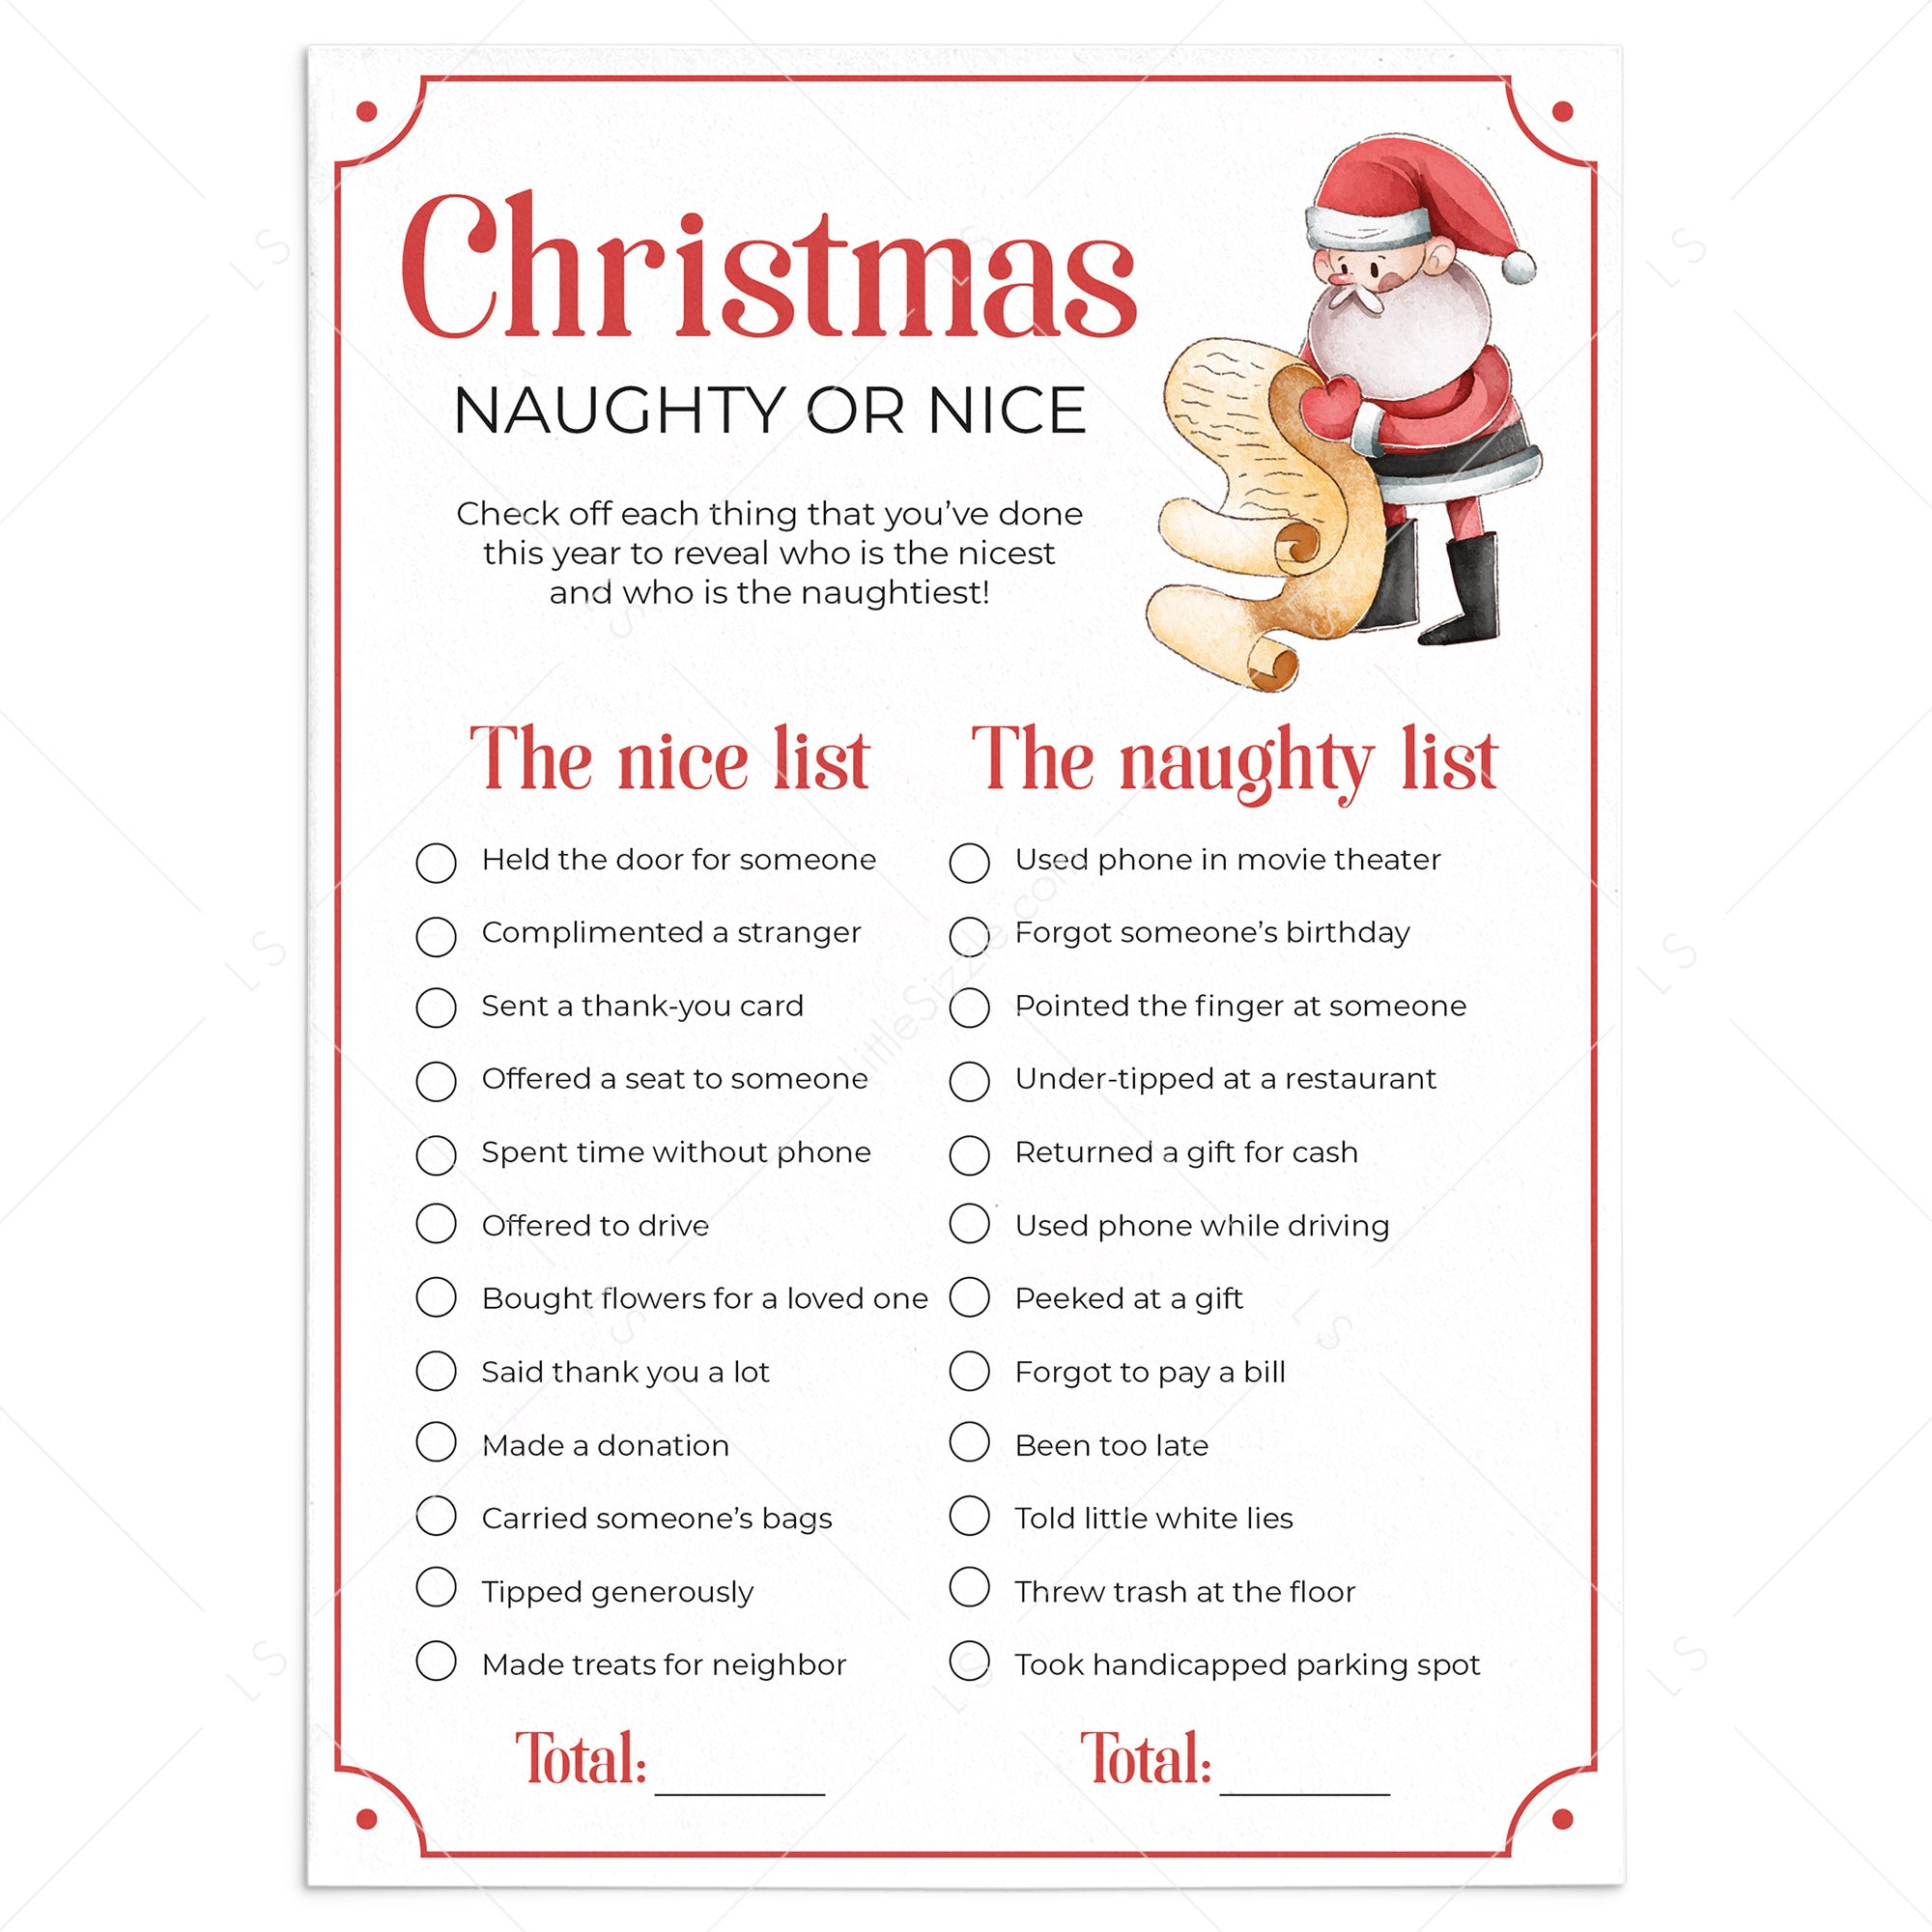 Christmas Naughty or Nice List for Adults Printable LittleSizzle